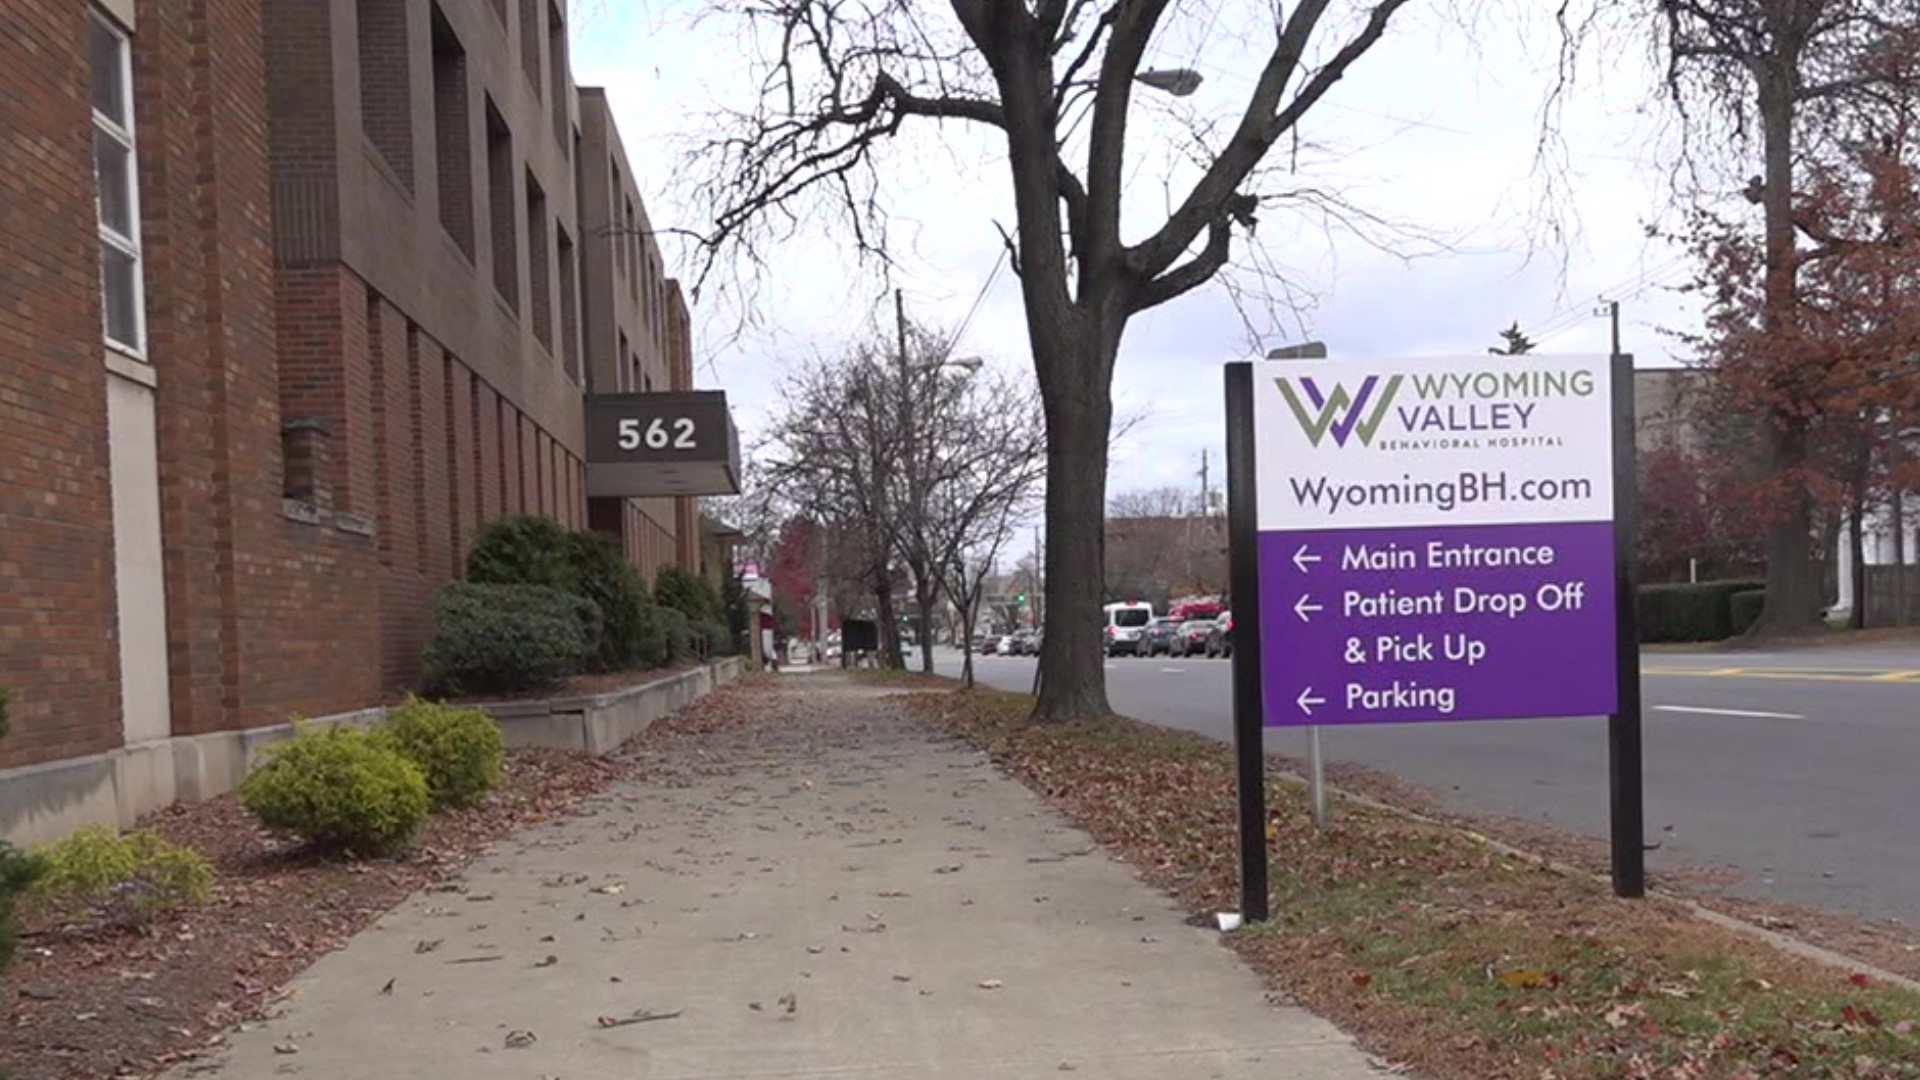 A new mental health facility has opened its doors in Luzerne County. Newswatch 16's Chelsea Strub spoke with the CEO to learn about its services.